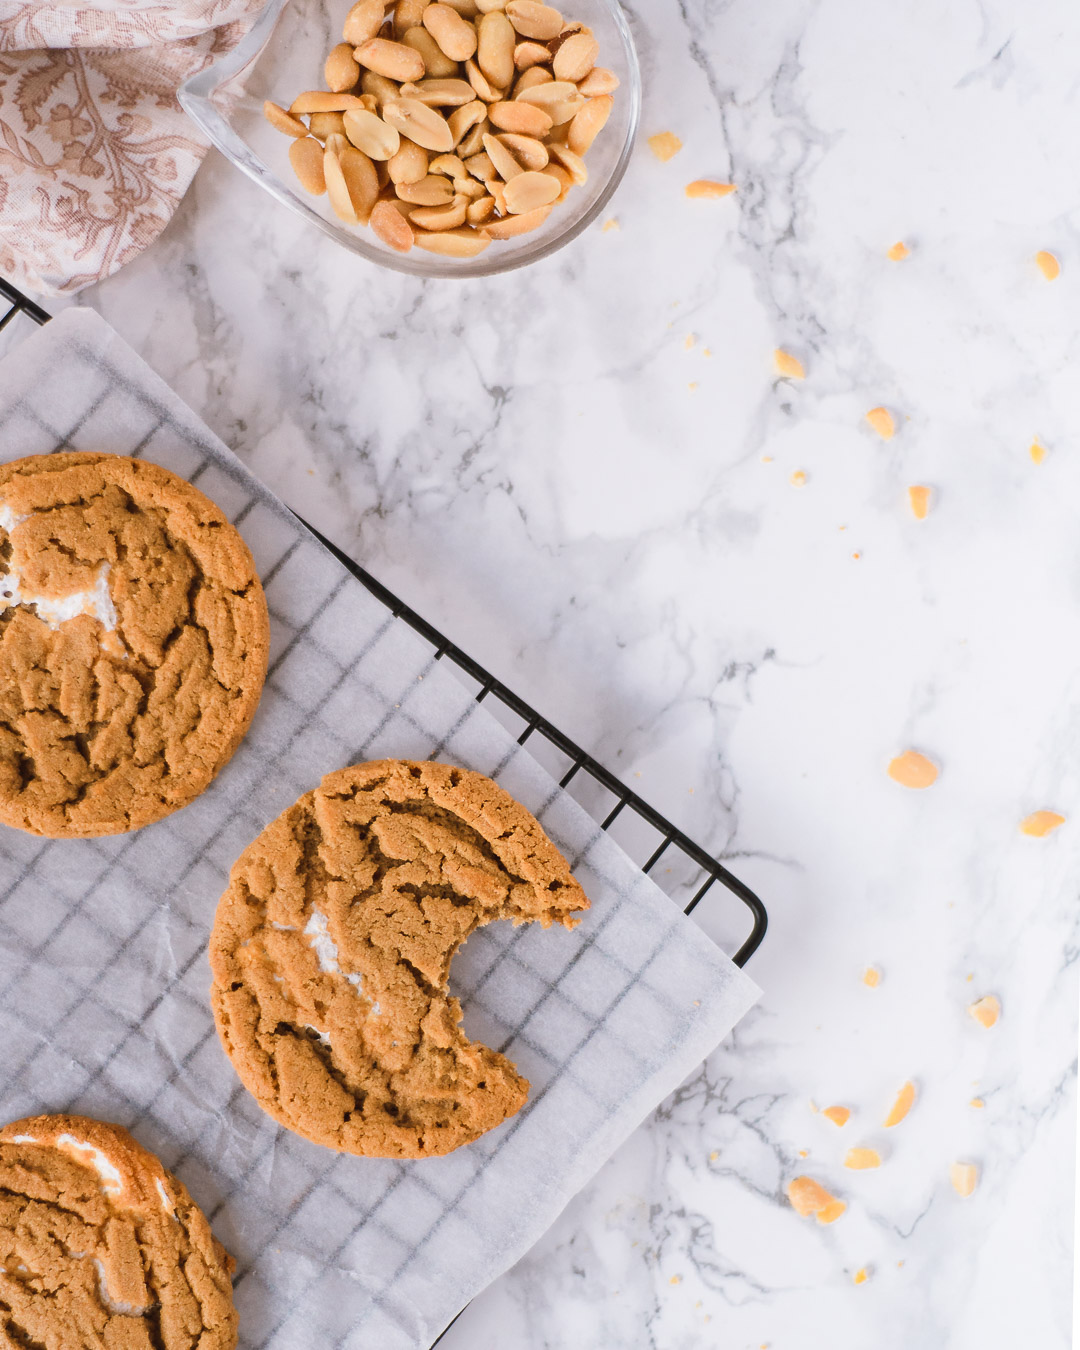 Peanut butter cookies on a wire rack with a small bowl of peanuts